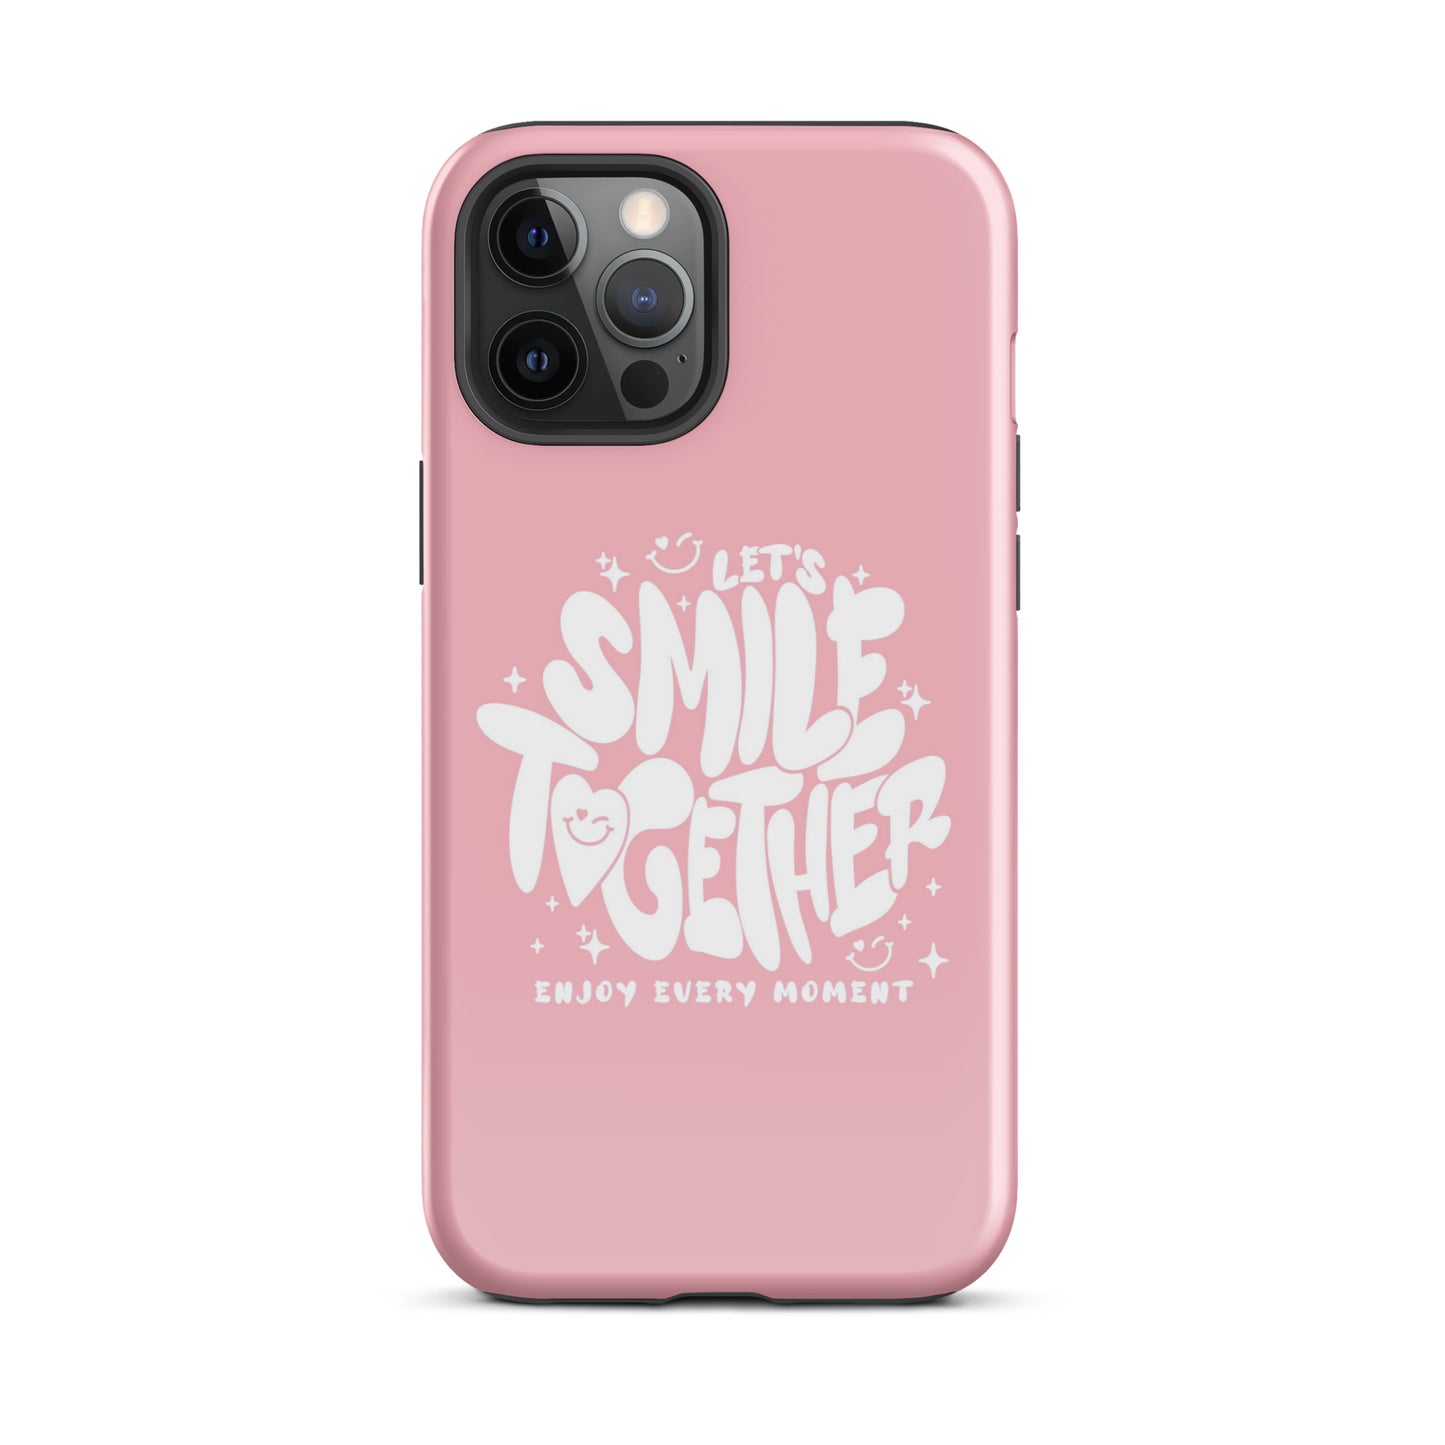 Smile Together iPhone Case iPhone 12 Pro Max Glossy